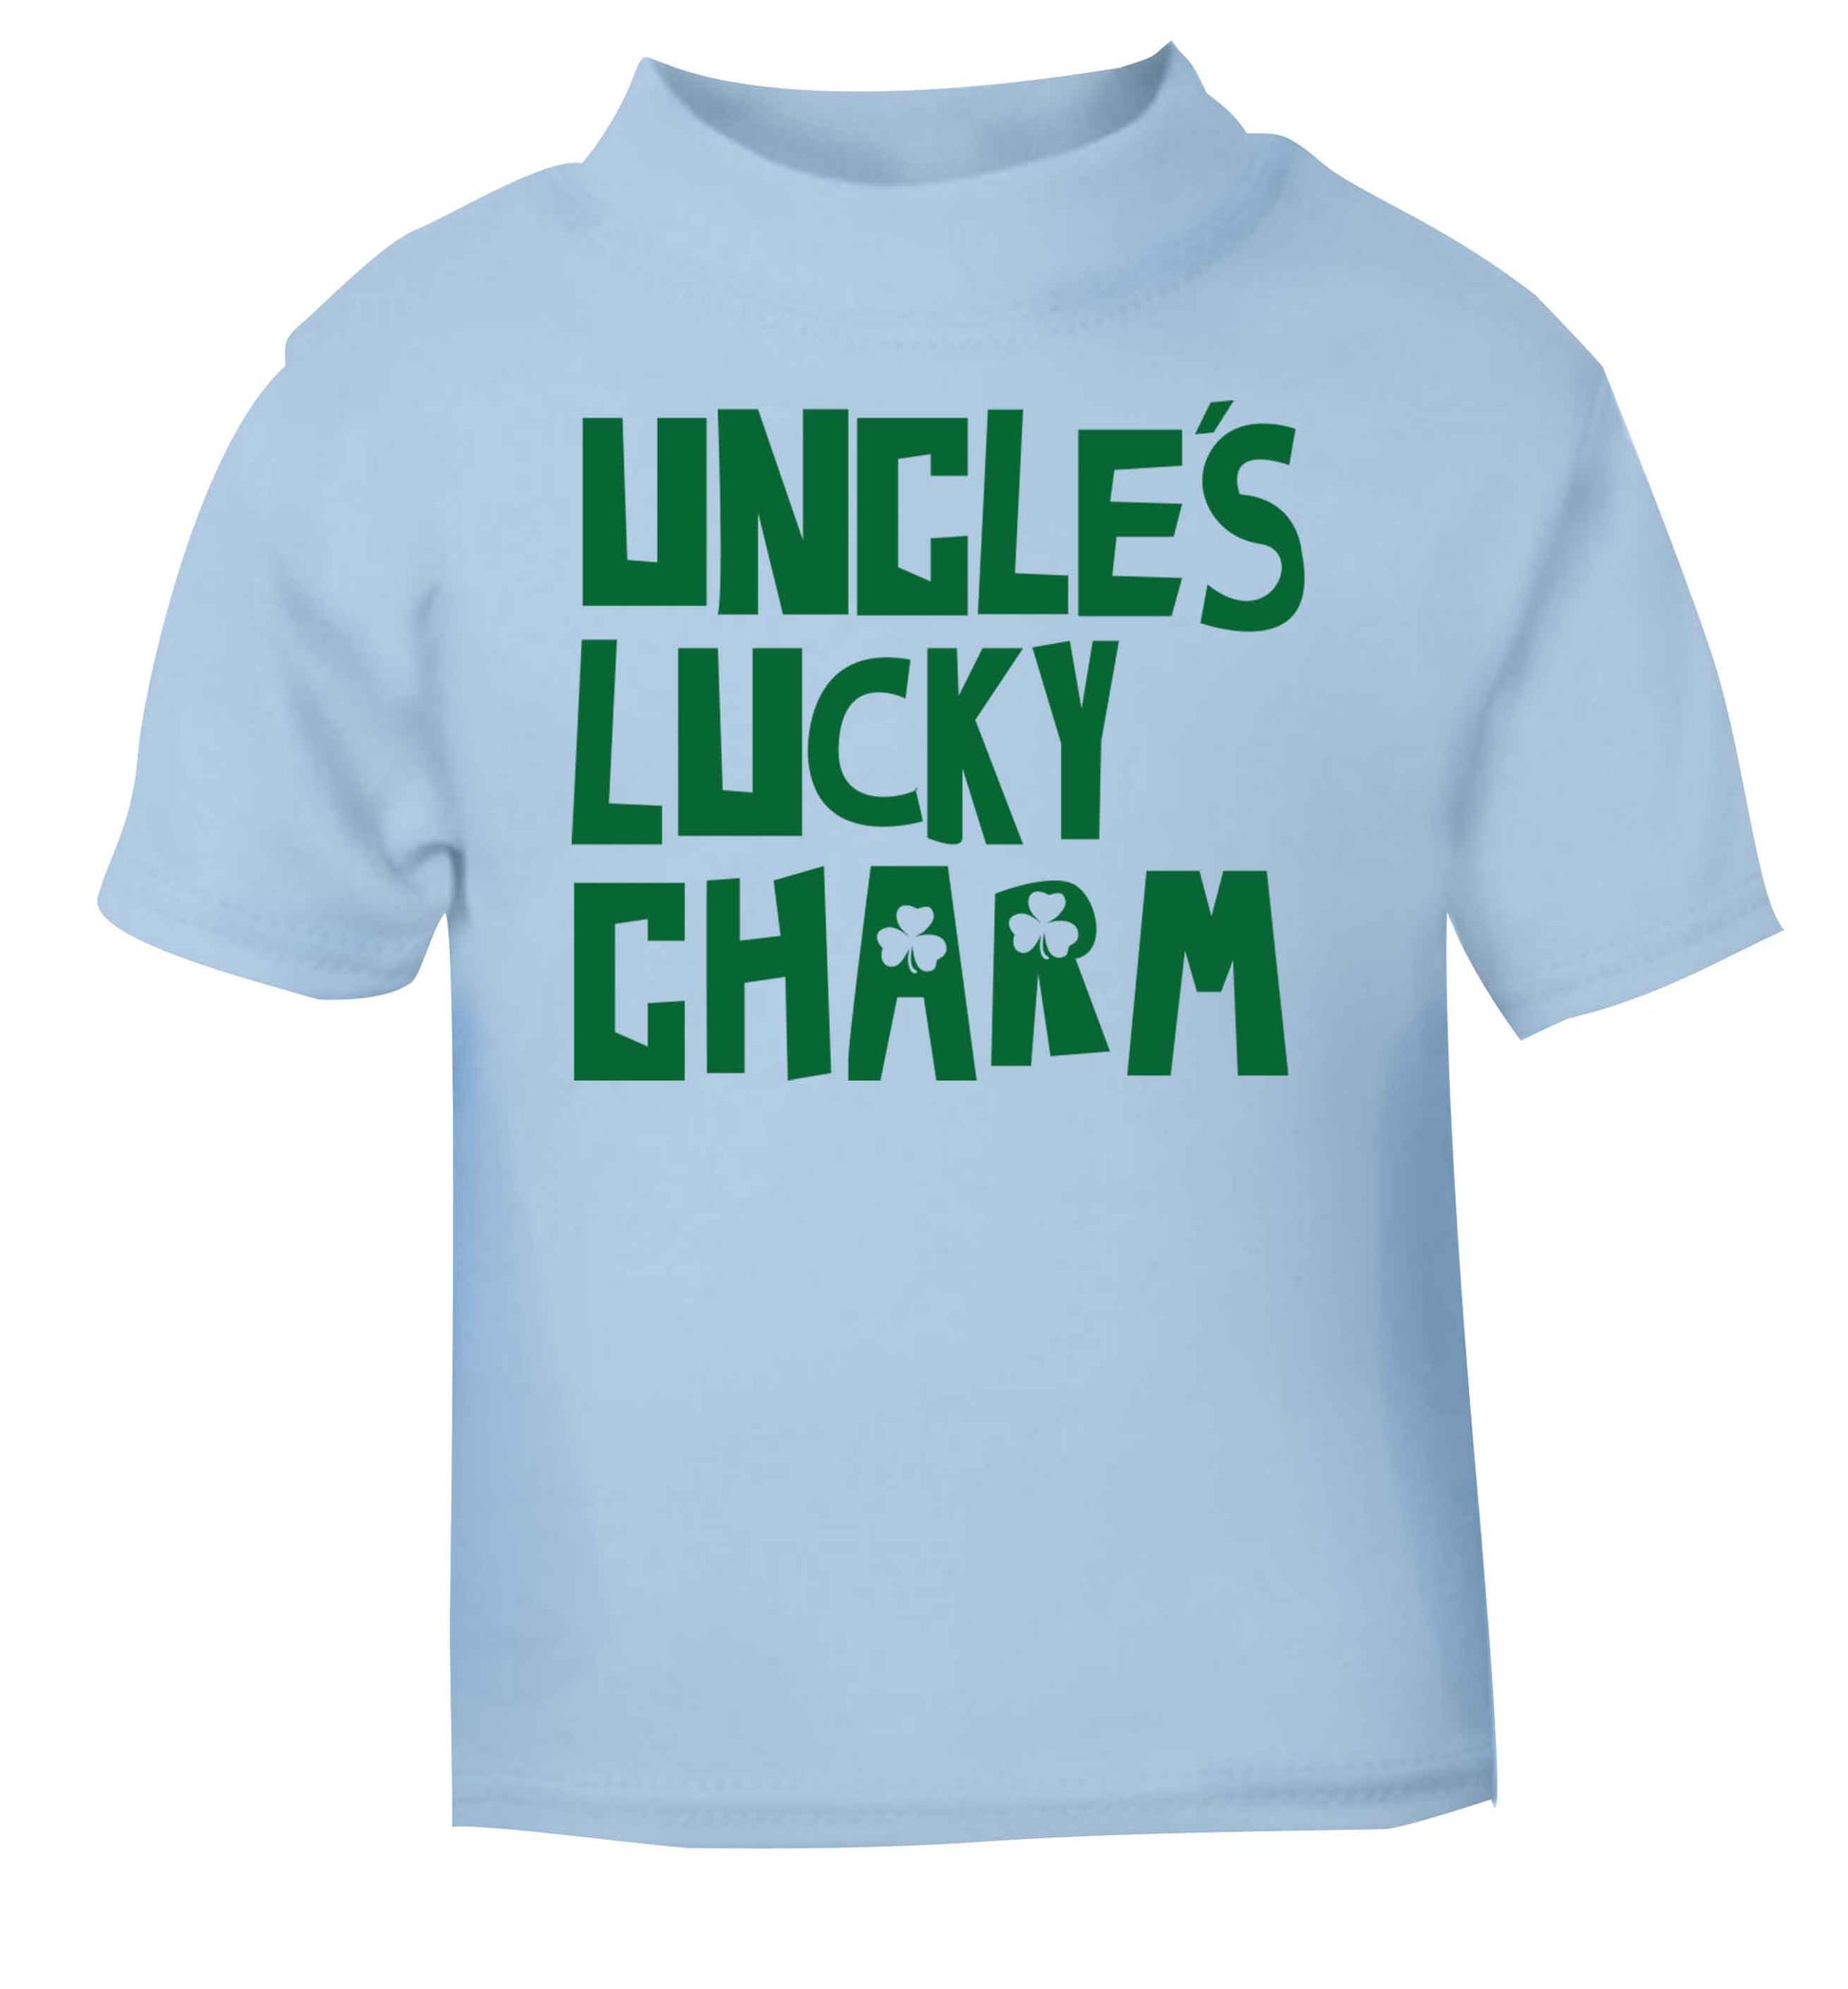 Uncles lucky charm light blue baby toddler Tshirt 2 Years